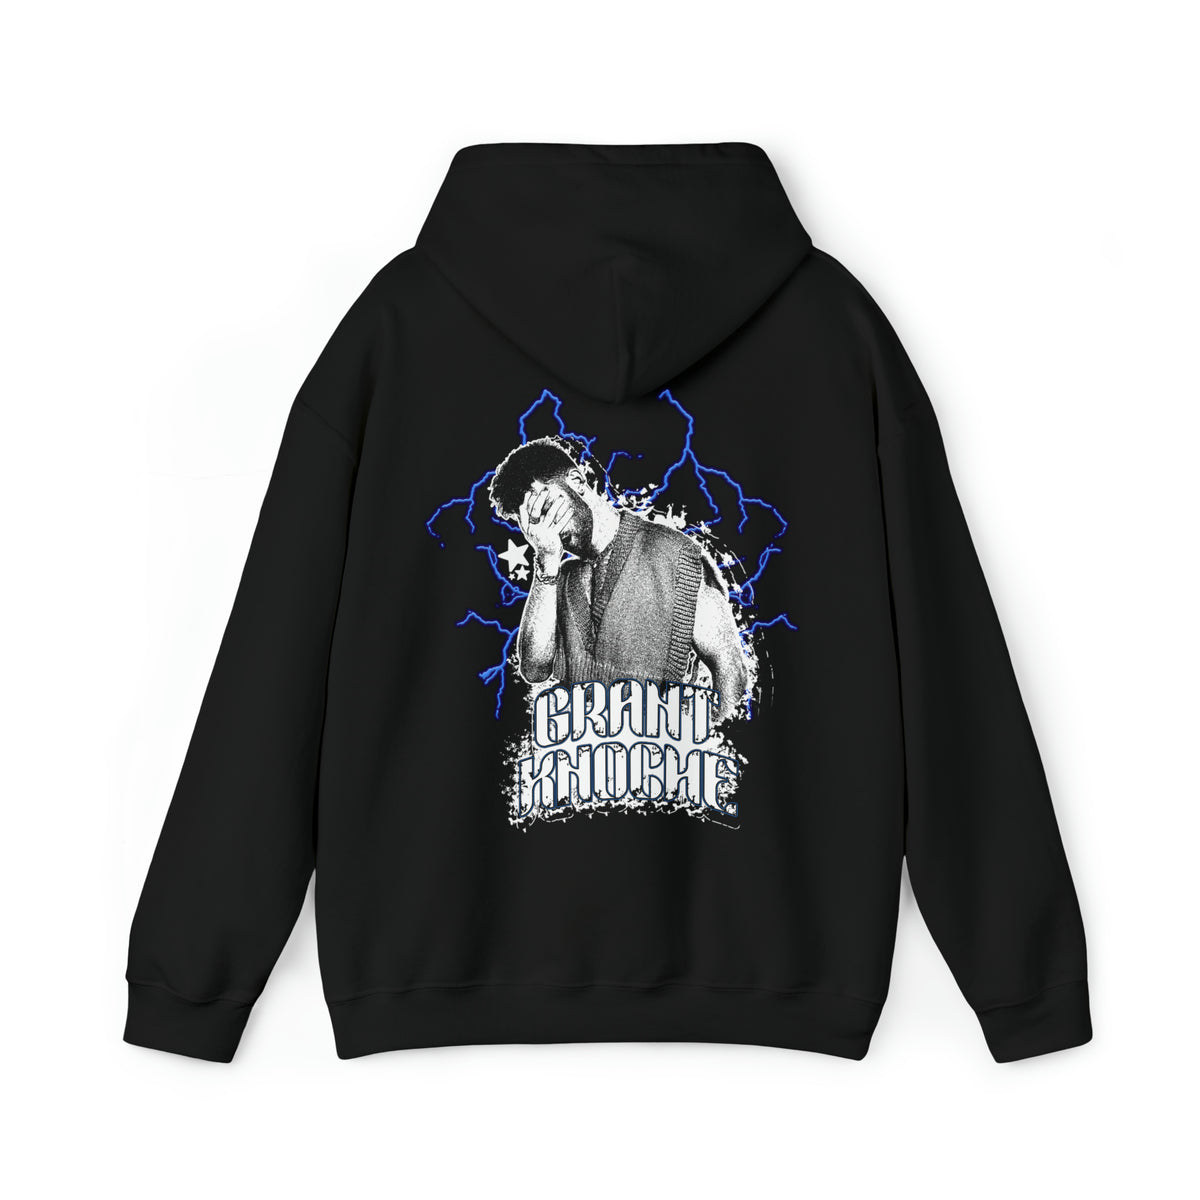 GRANT KNOCHE x I COULD DIE JUST THINKING OF US Graphic Hoodie